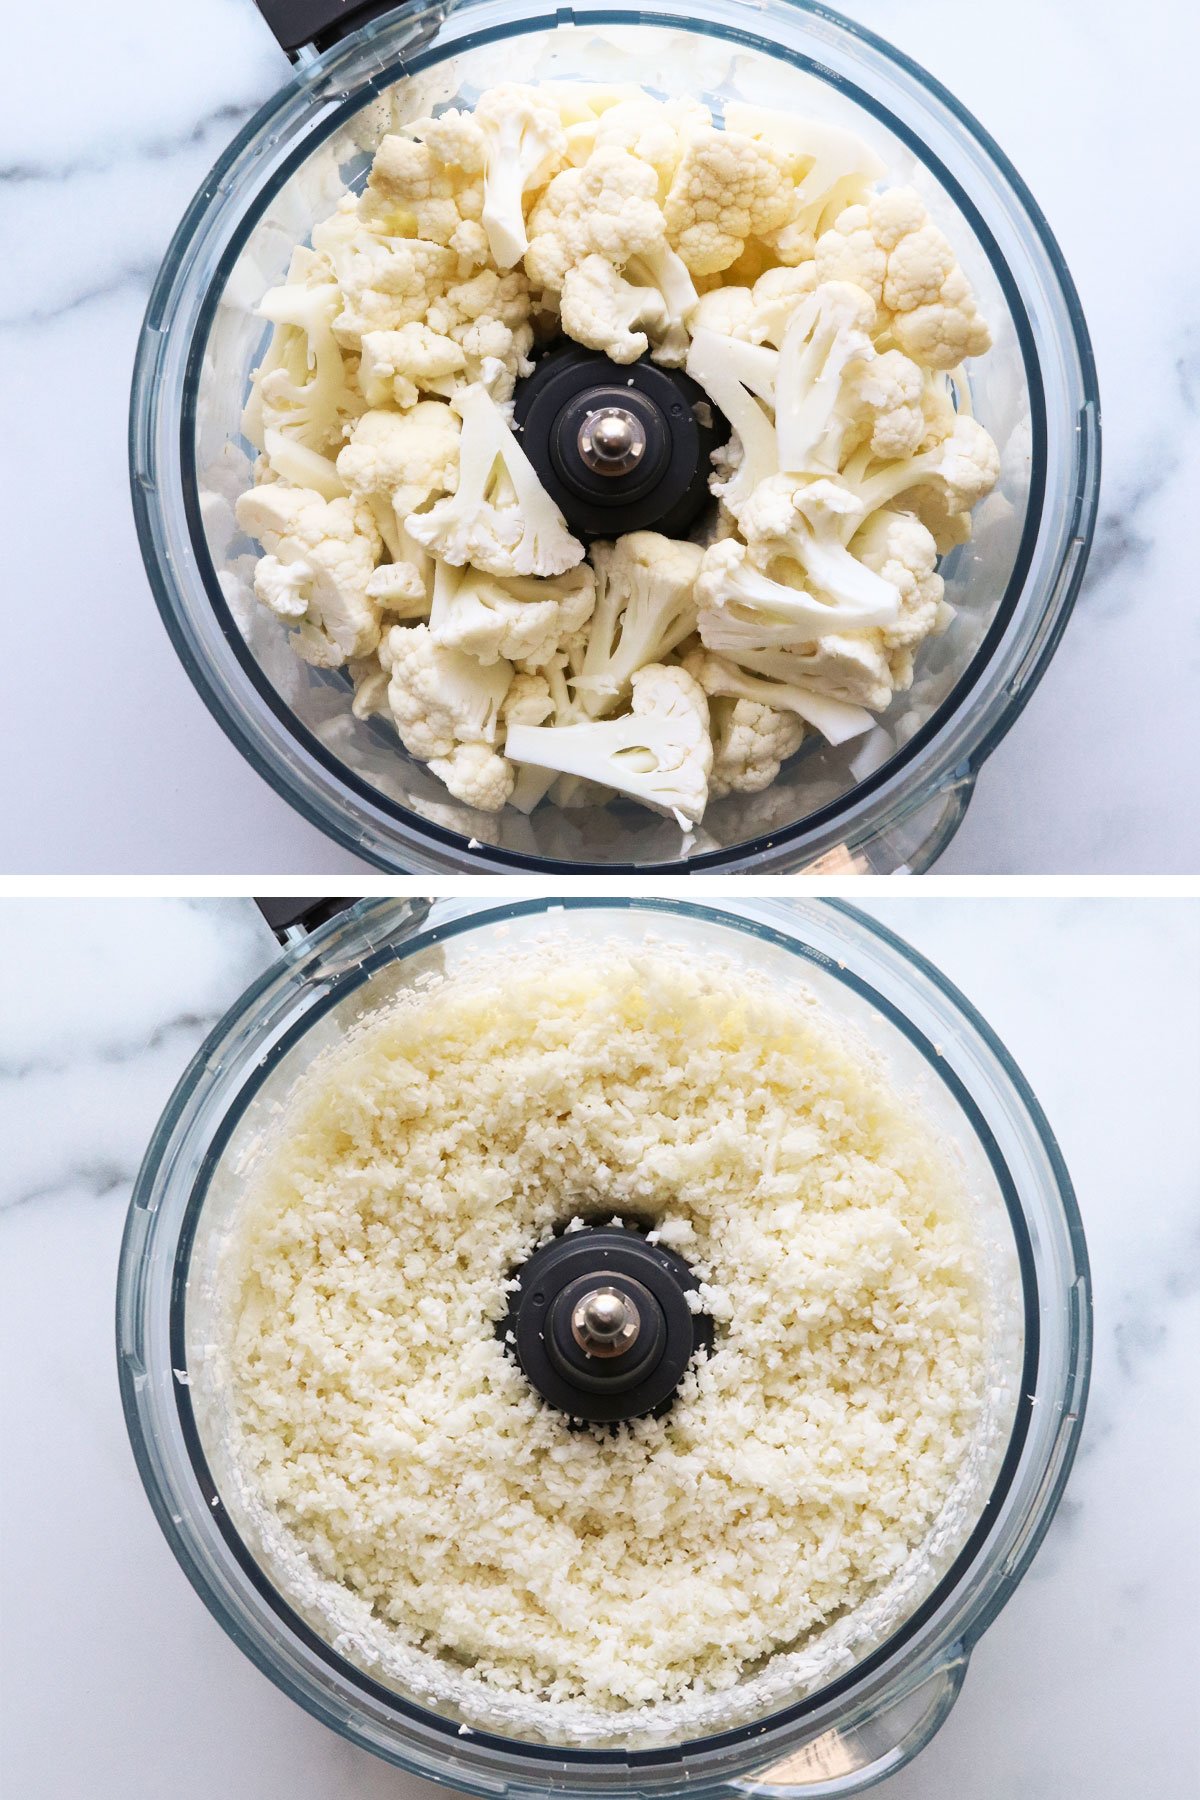 Cauliflower florets pulsed in a food processor to create rice.